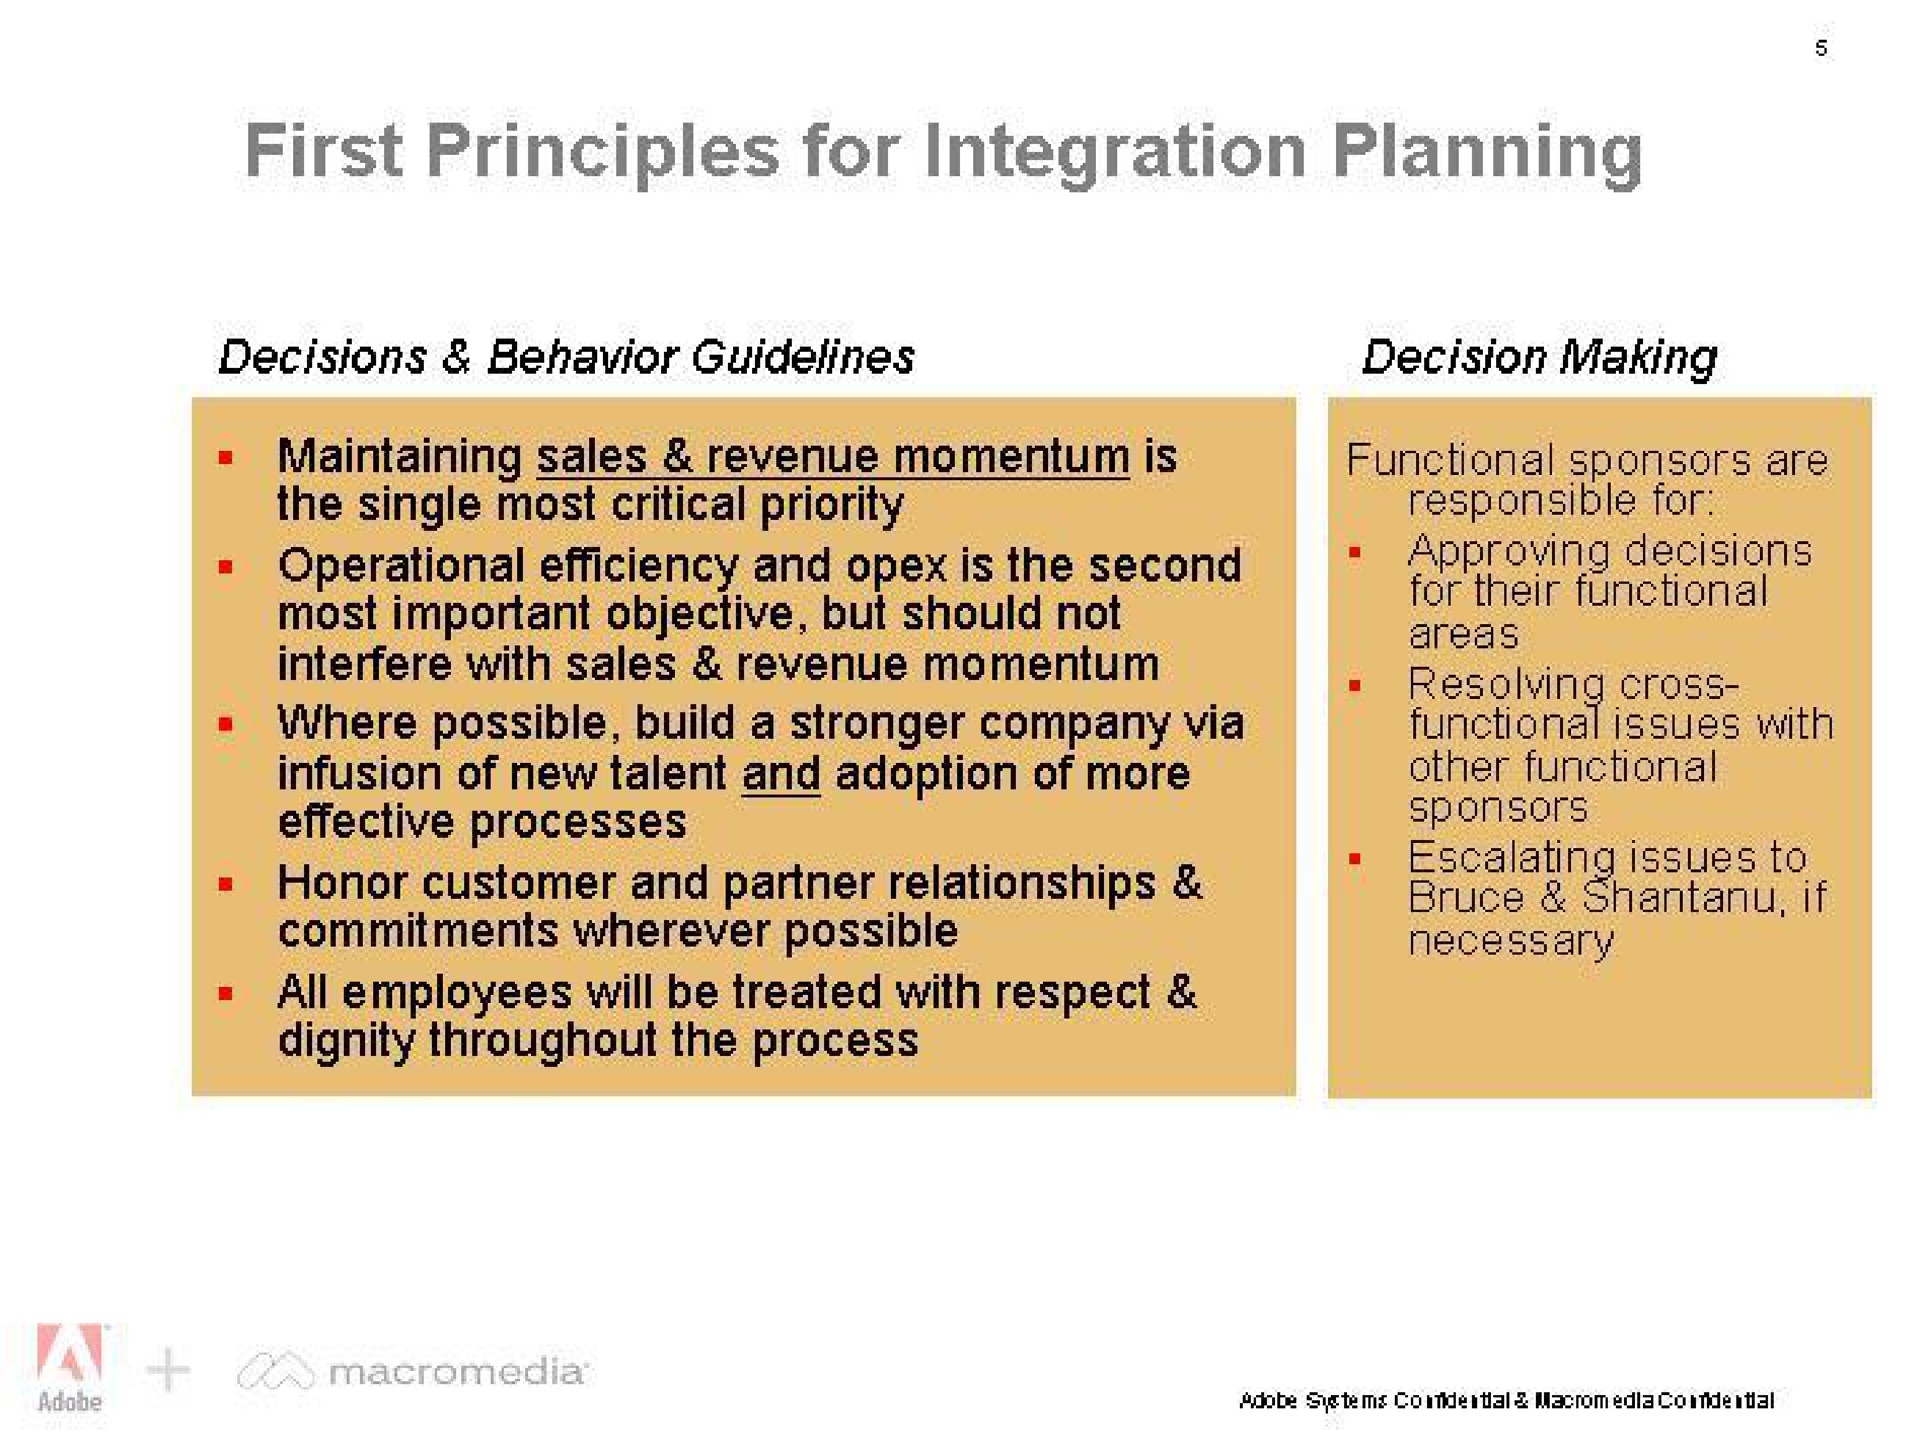 first principles for integration | Adobe